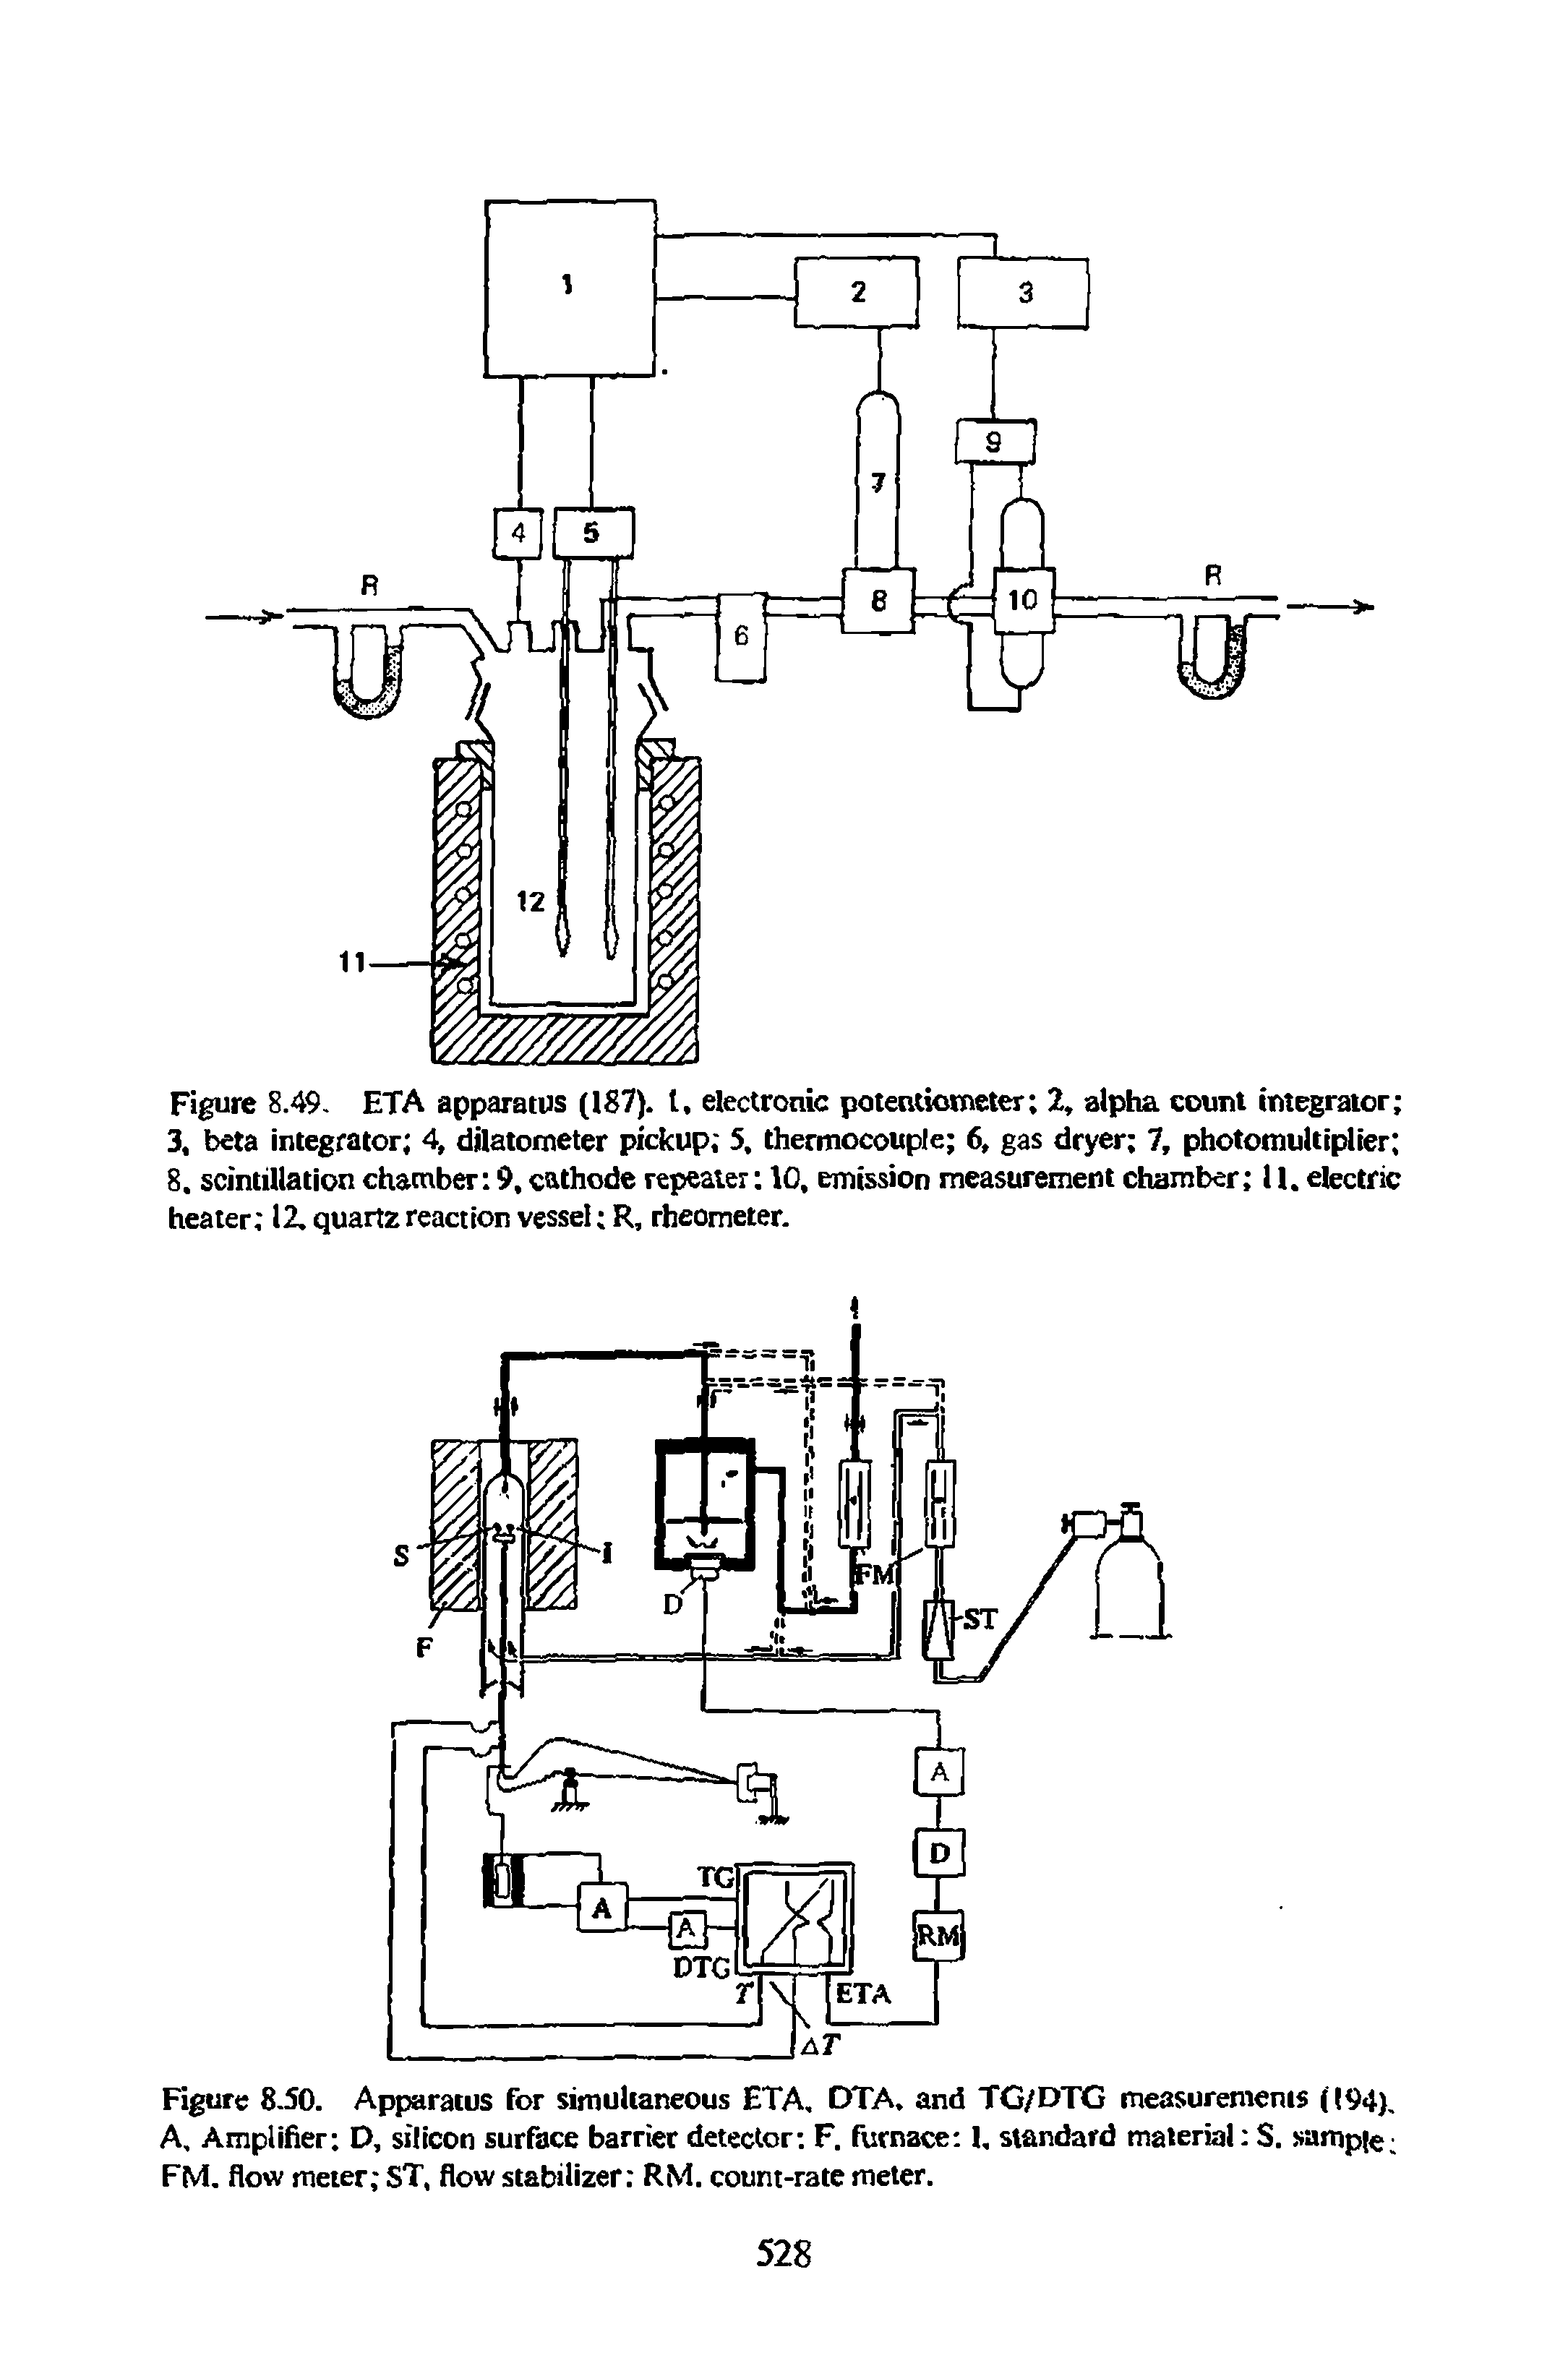 Figure 8.50. Apparatus for simultaneous ETA, DTA, and TG/DTG measurements (194). A, Amplifier D, silicon surface barrier detector F. furnace 1, standard material S. sample FM. flow meter ST, flow stabilizer RM. count-rate meter.